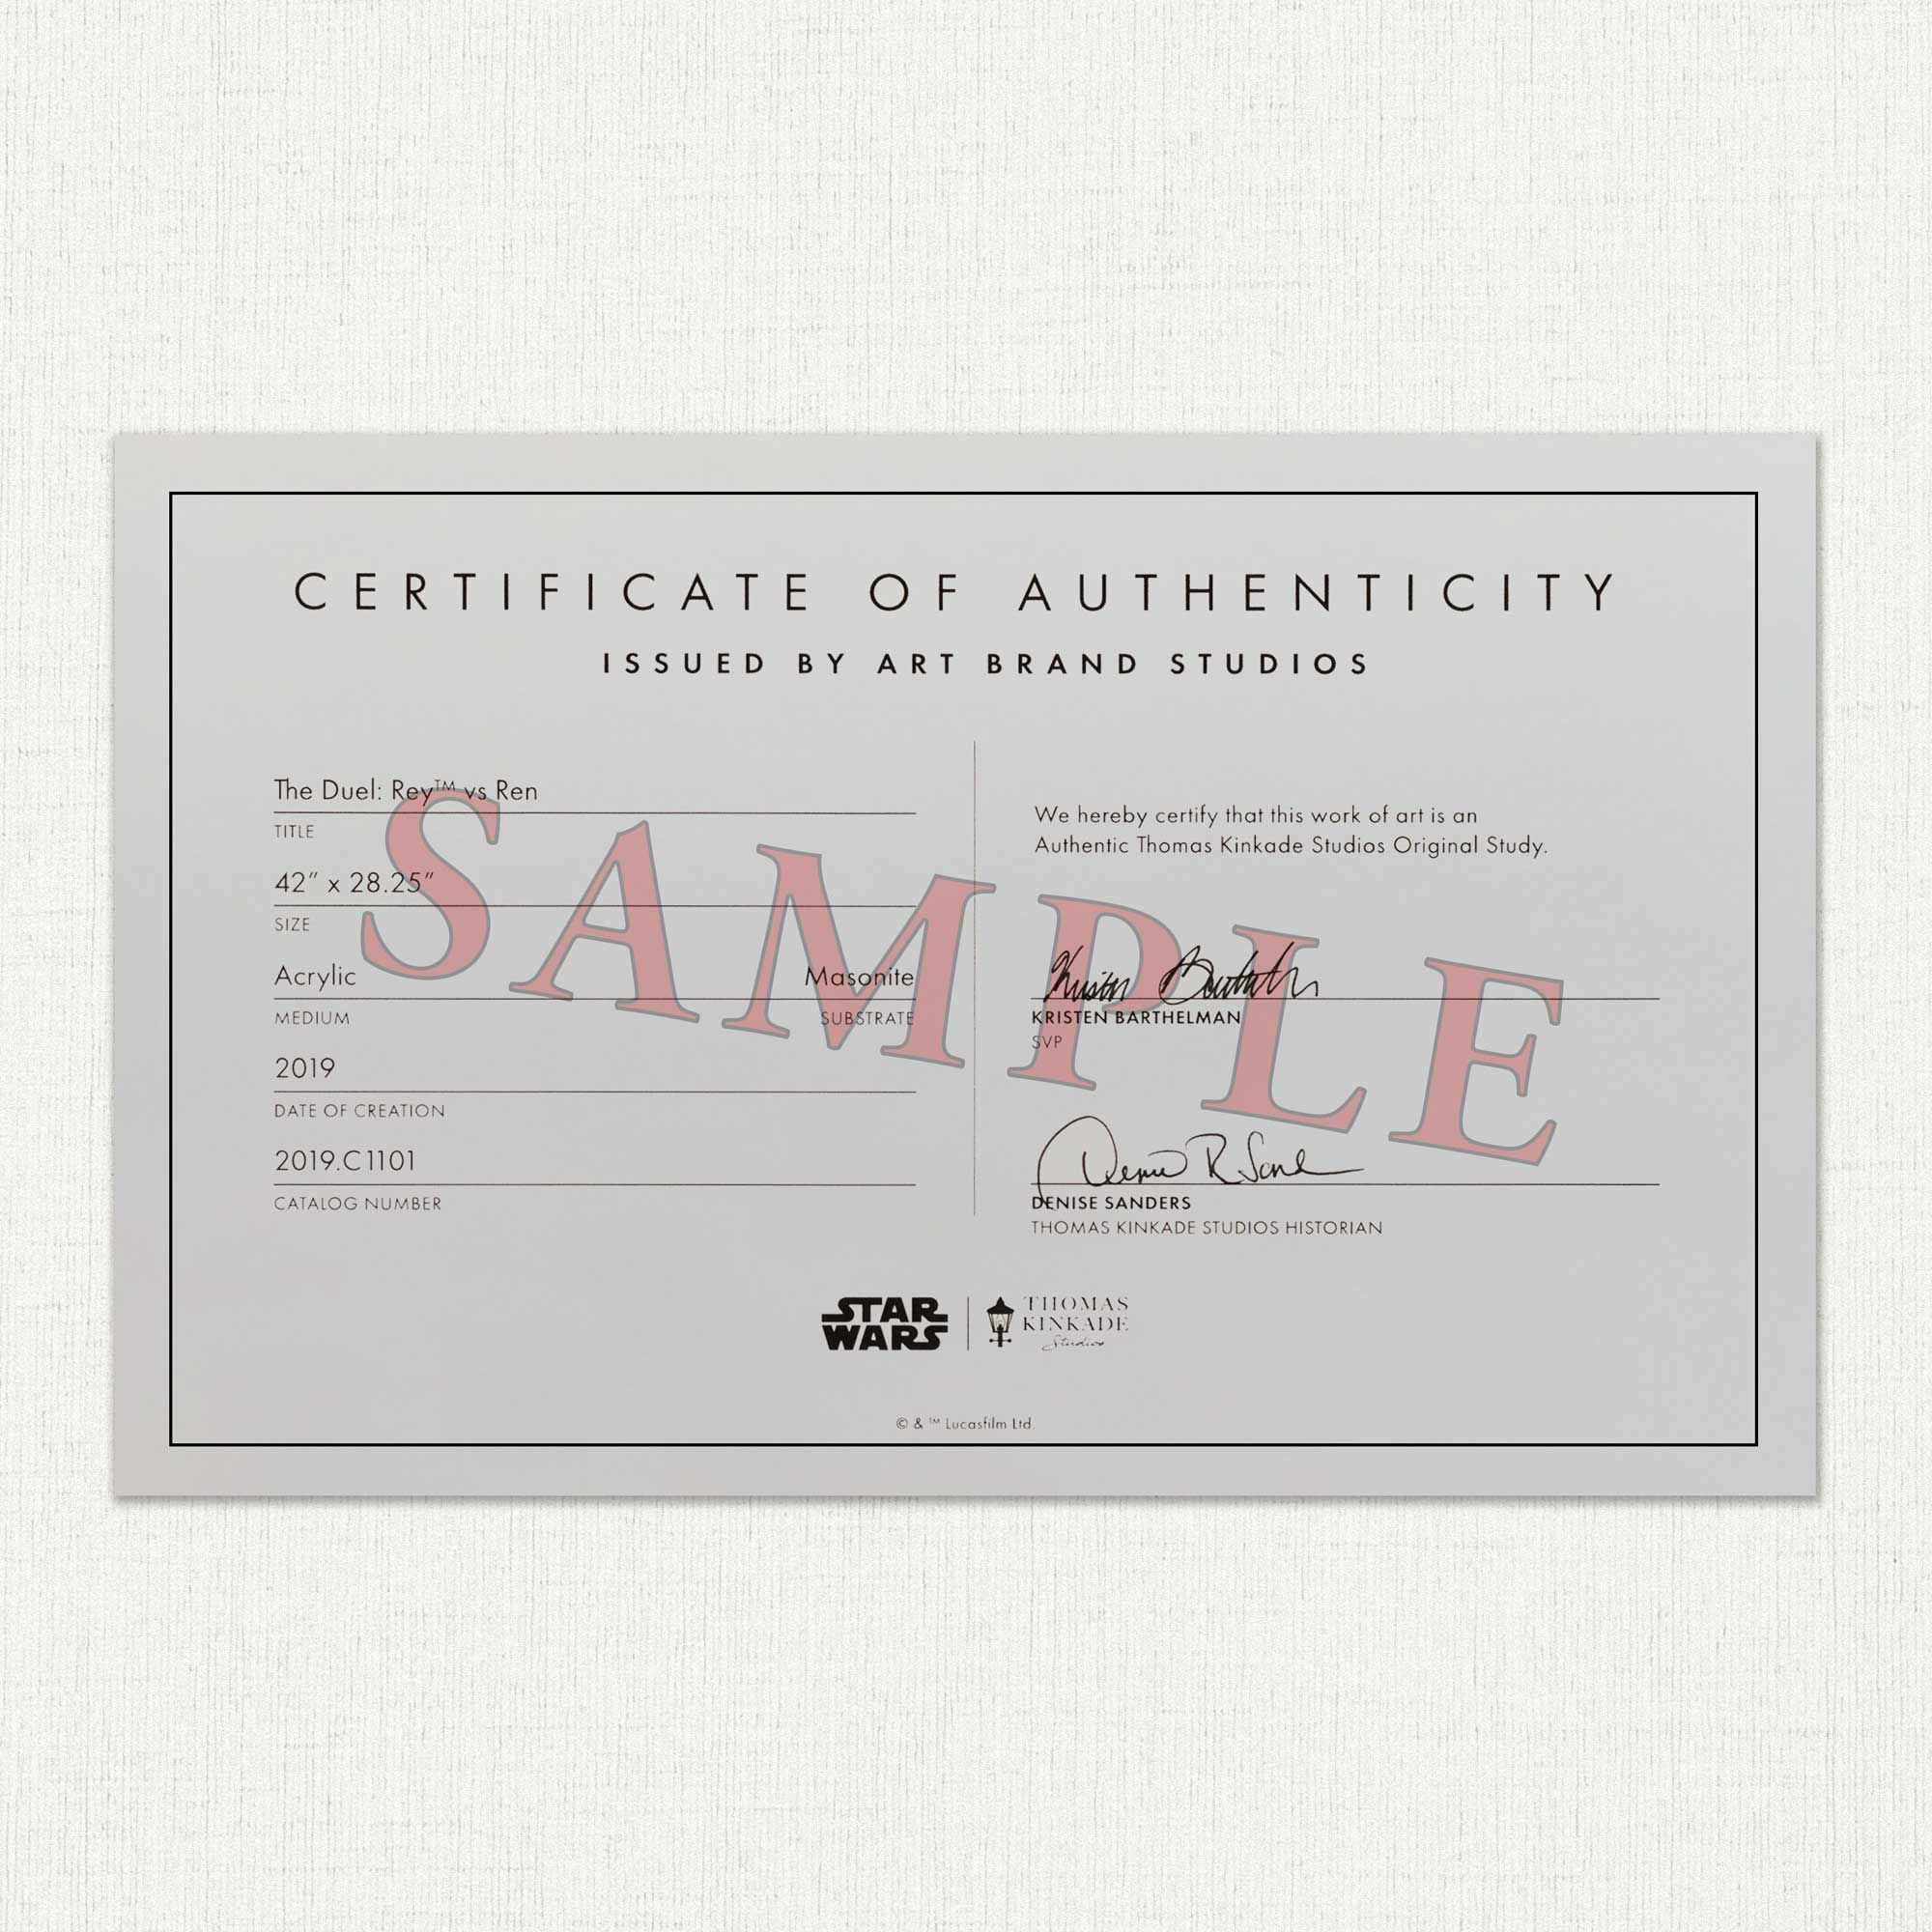 Certificate of Authenticity - Sample